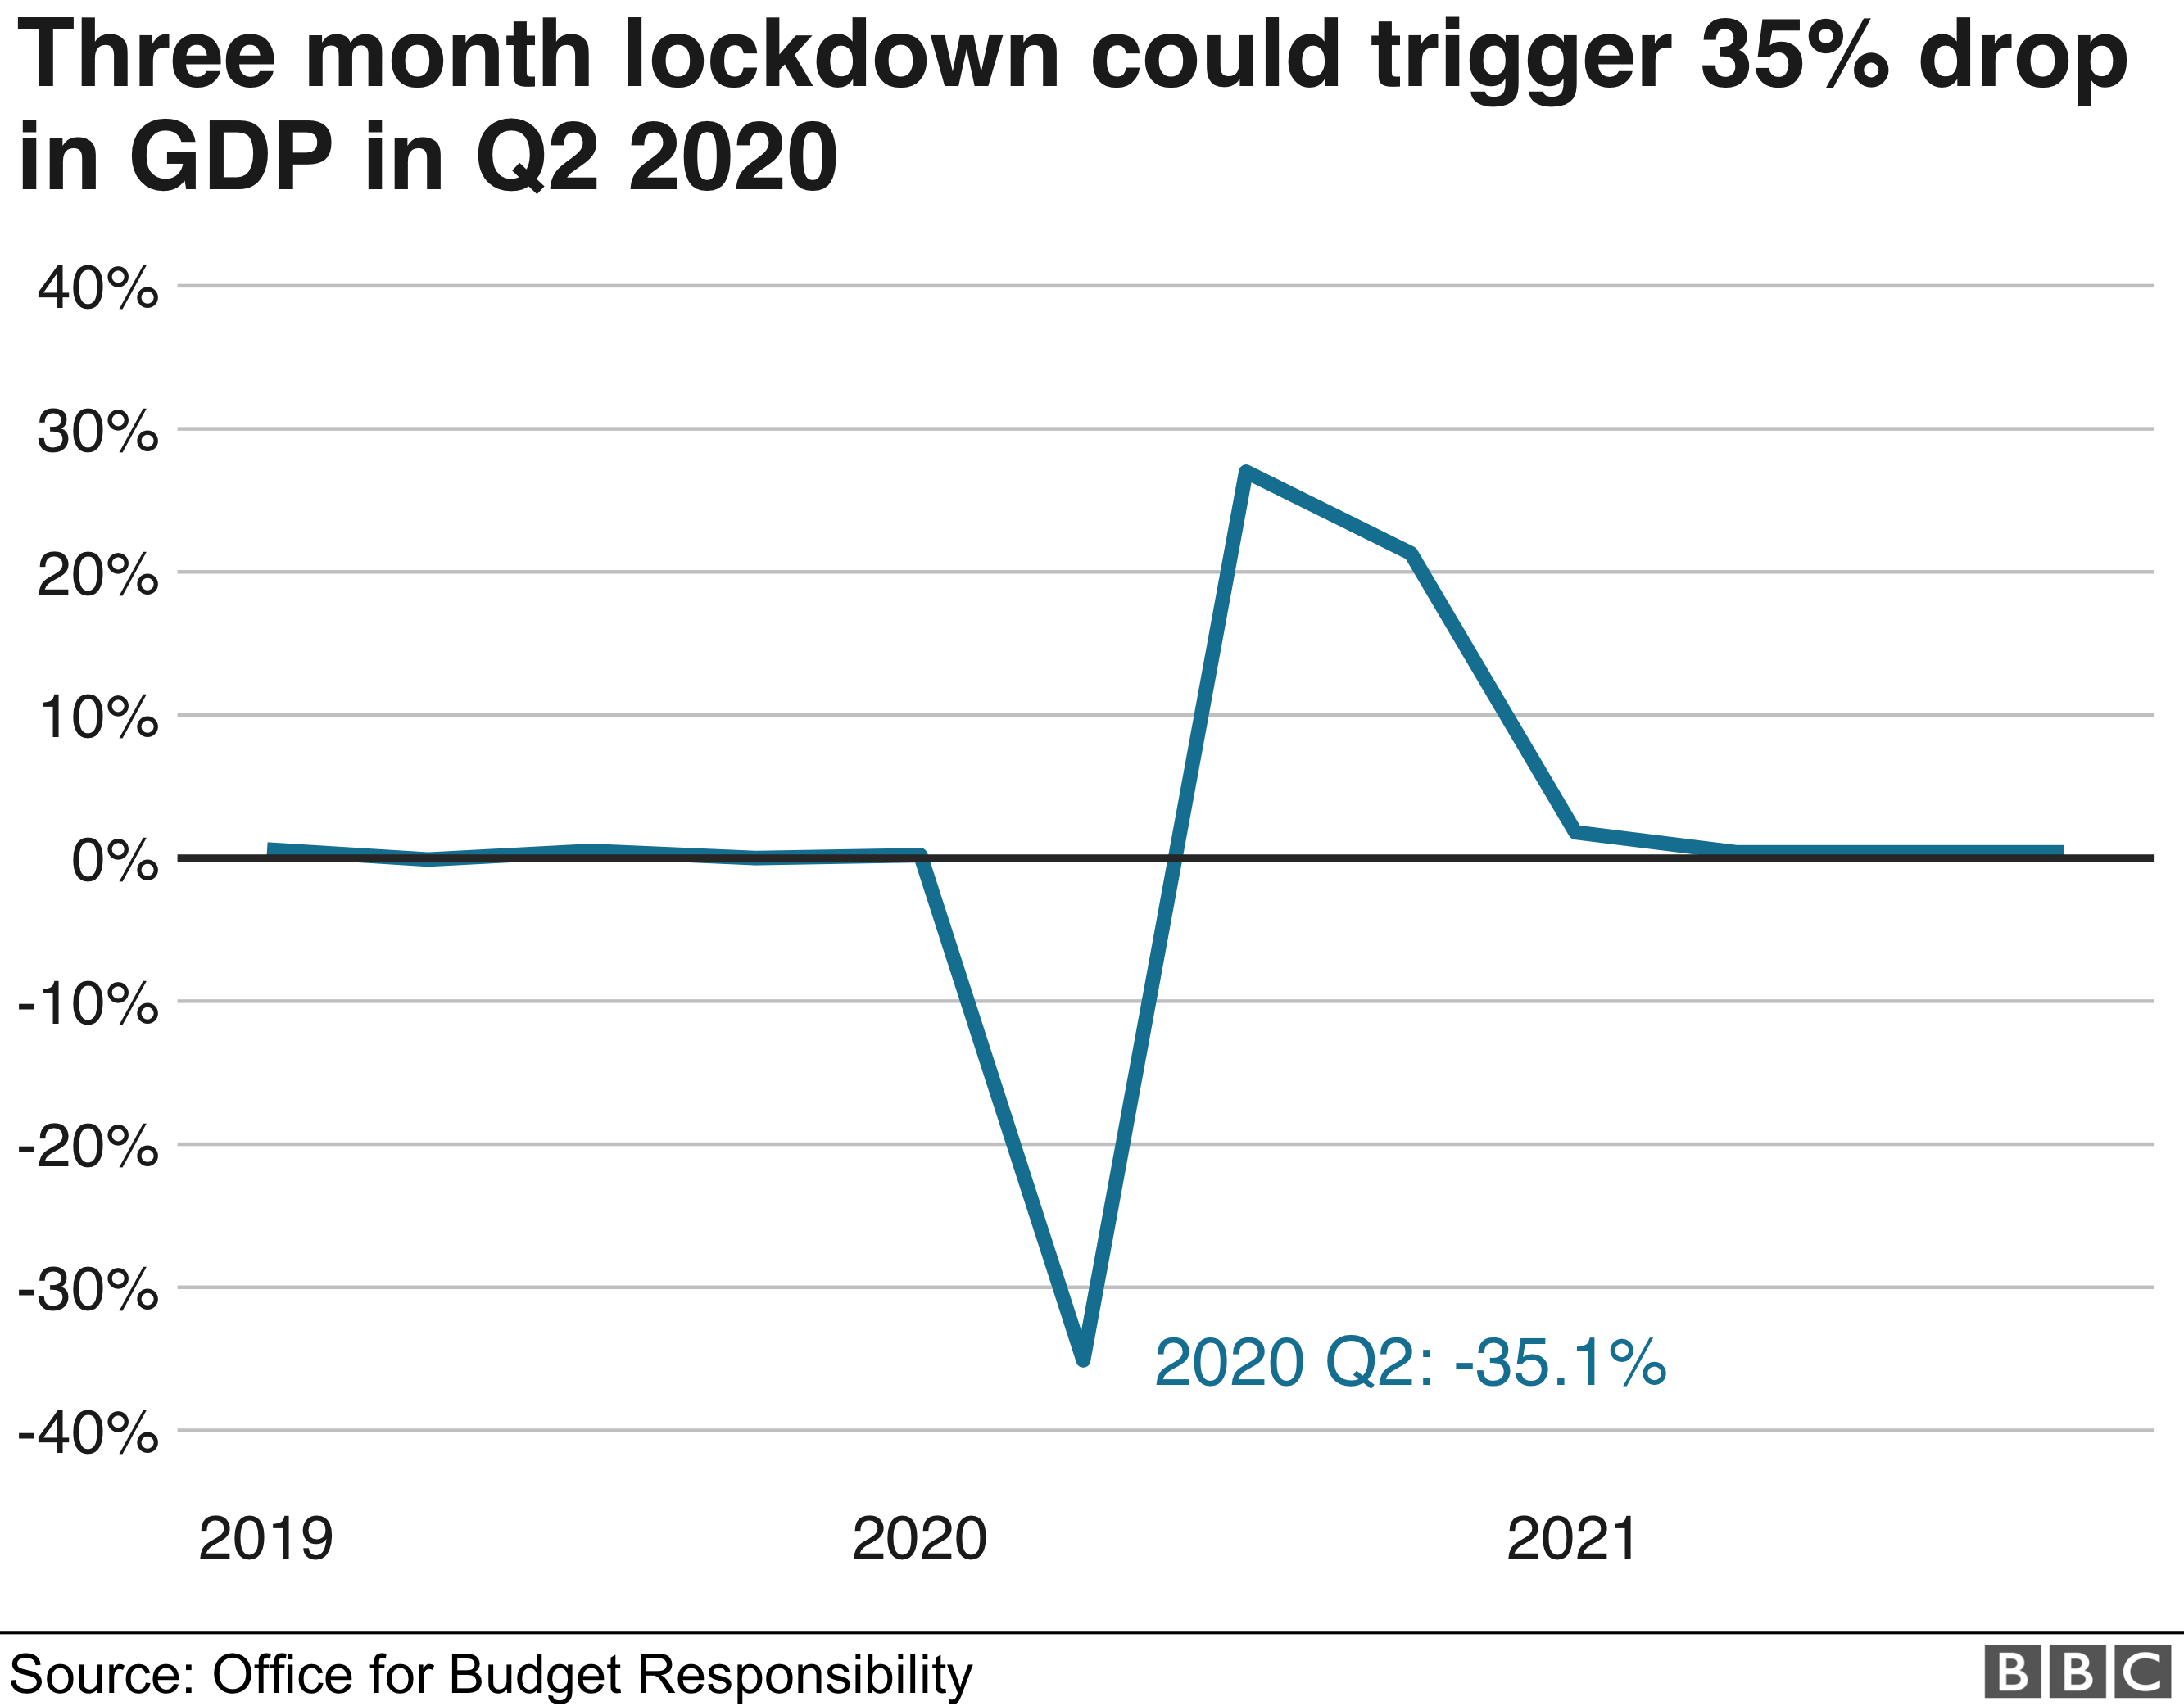 Graph showing that a three month lockdown could trigger a 35% drop in GDP in Q2 2020 in the UK